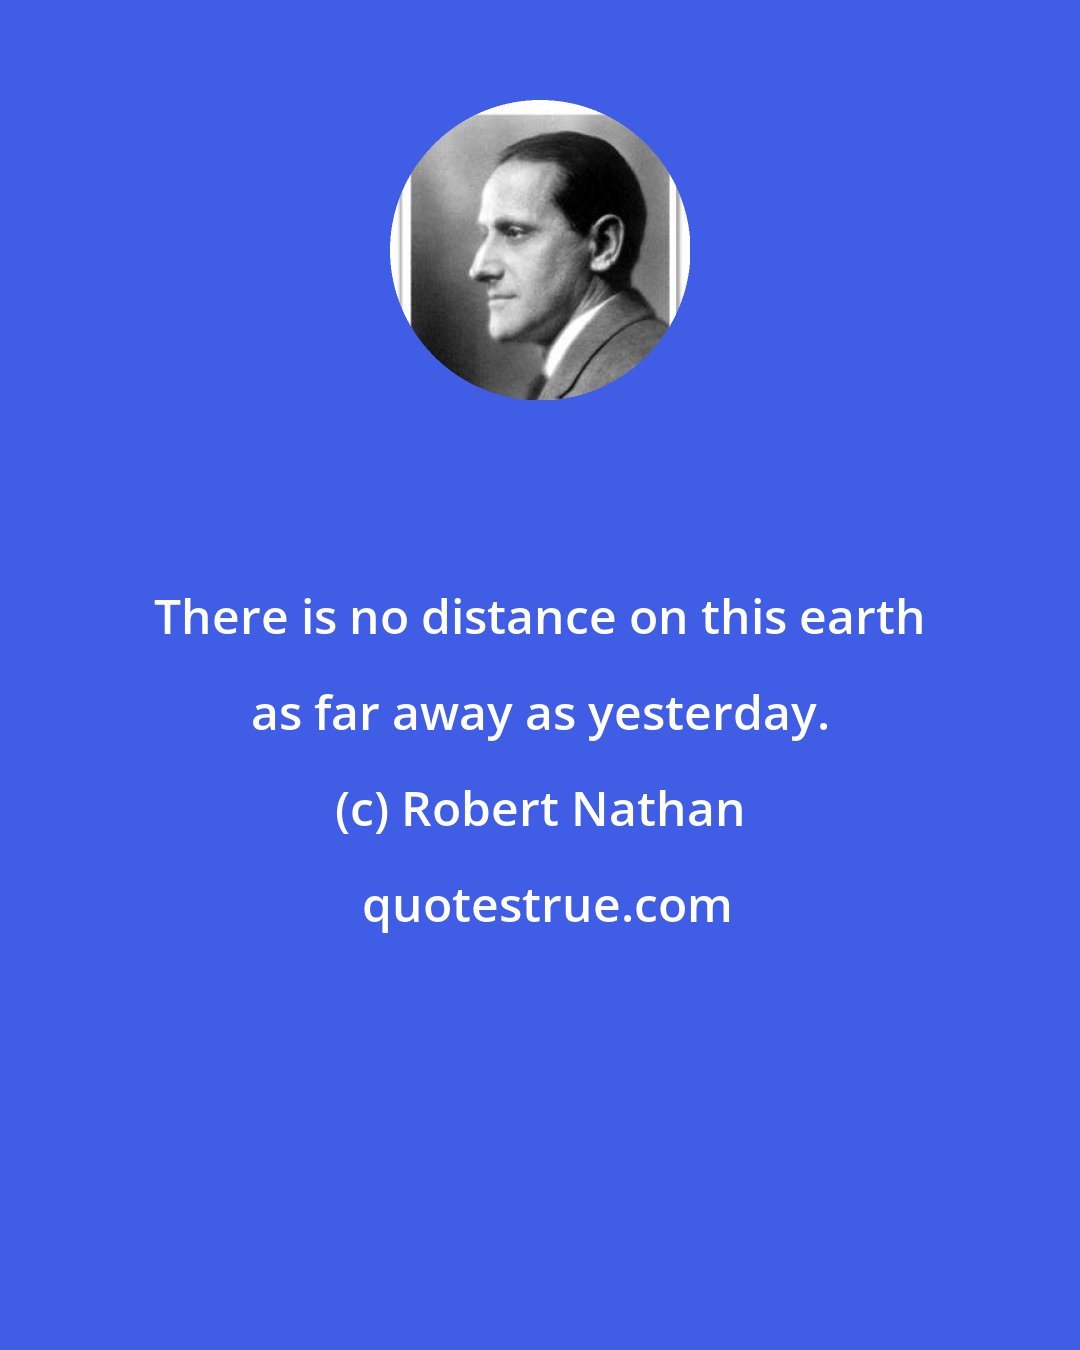 Robert Nathan: There is no distance on this earth as far away as yesterday.